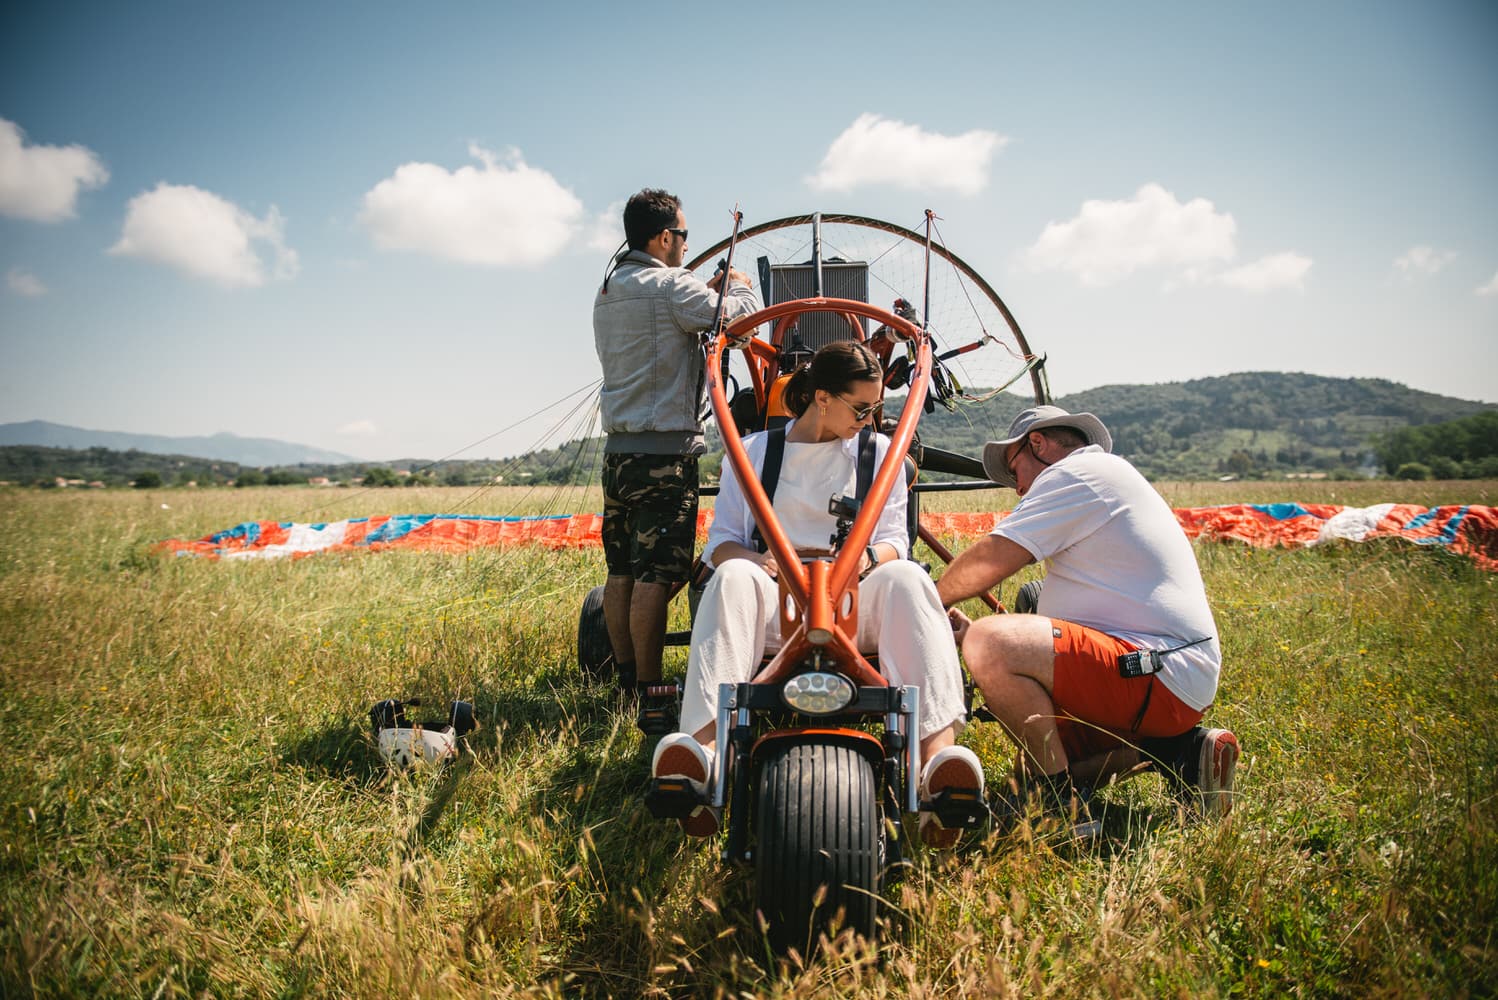 Bride's exhilaration before paragliding, a daring adventure during their Corfu elopement.